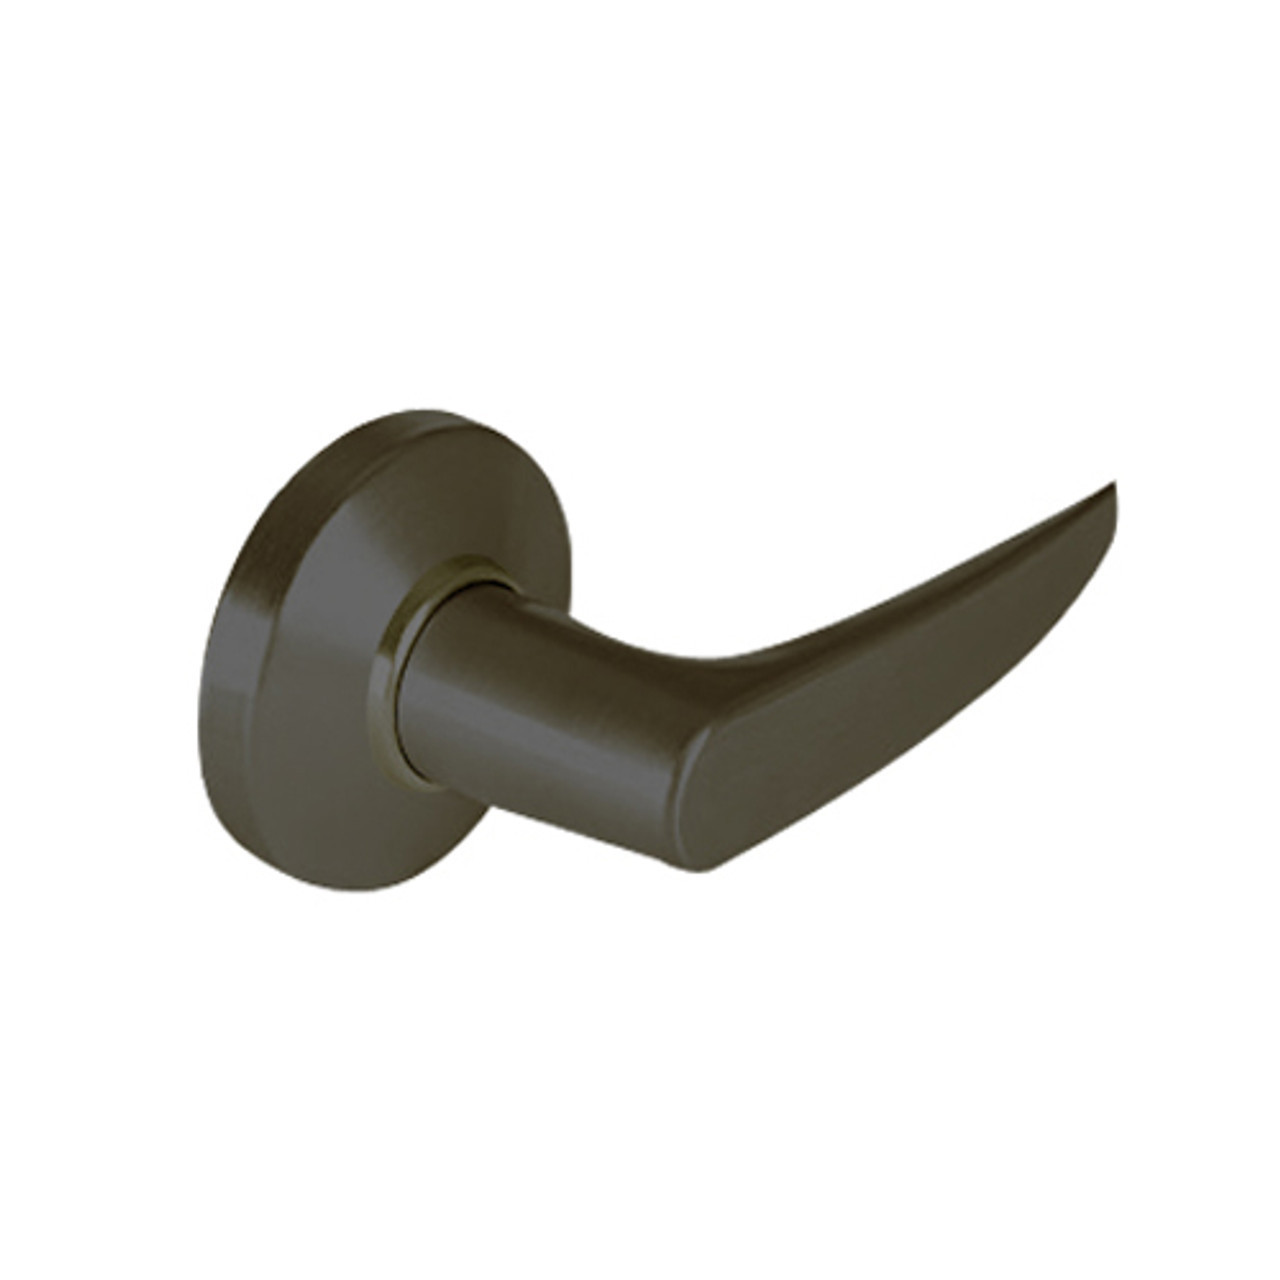 9K40Y16CS3613LM Best 9K Series Exit Heavy Duty Cylindrical Lever Locks with Curved Without Return Lever Design in Oil Rubbed Bronze